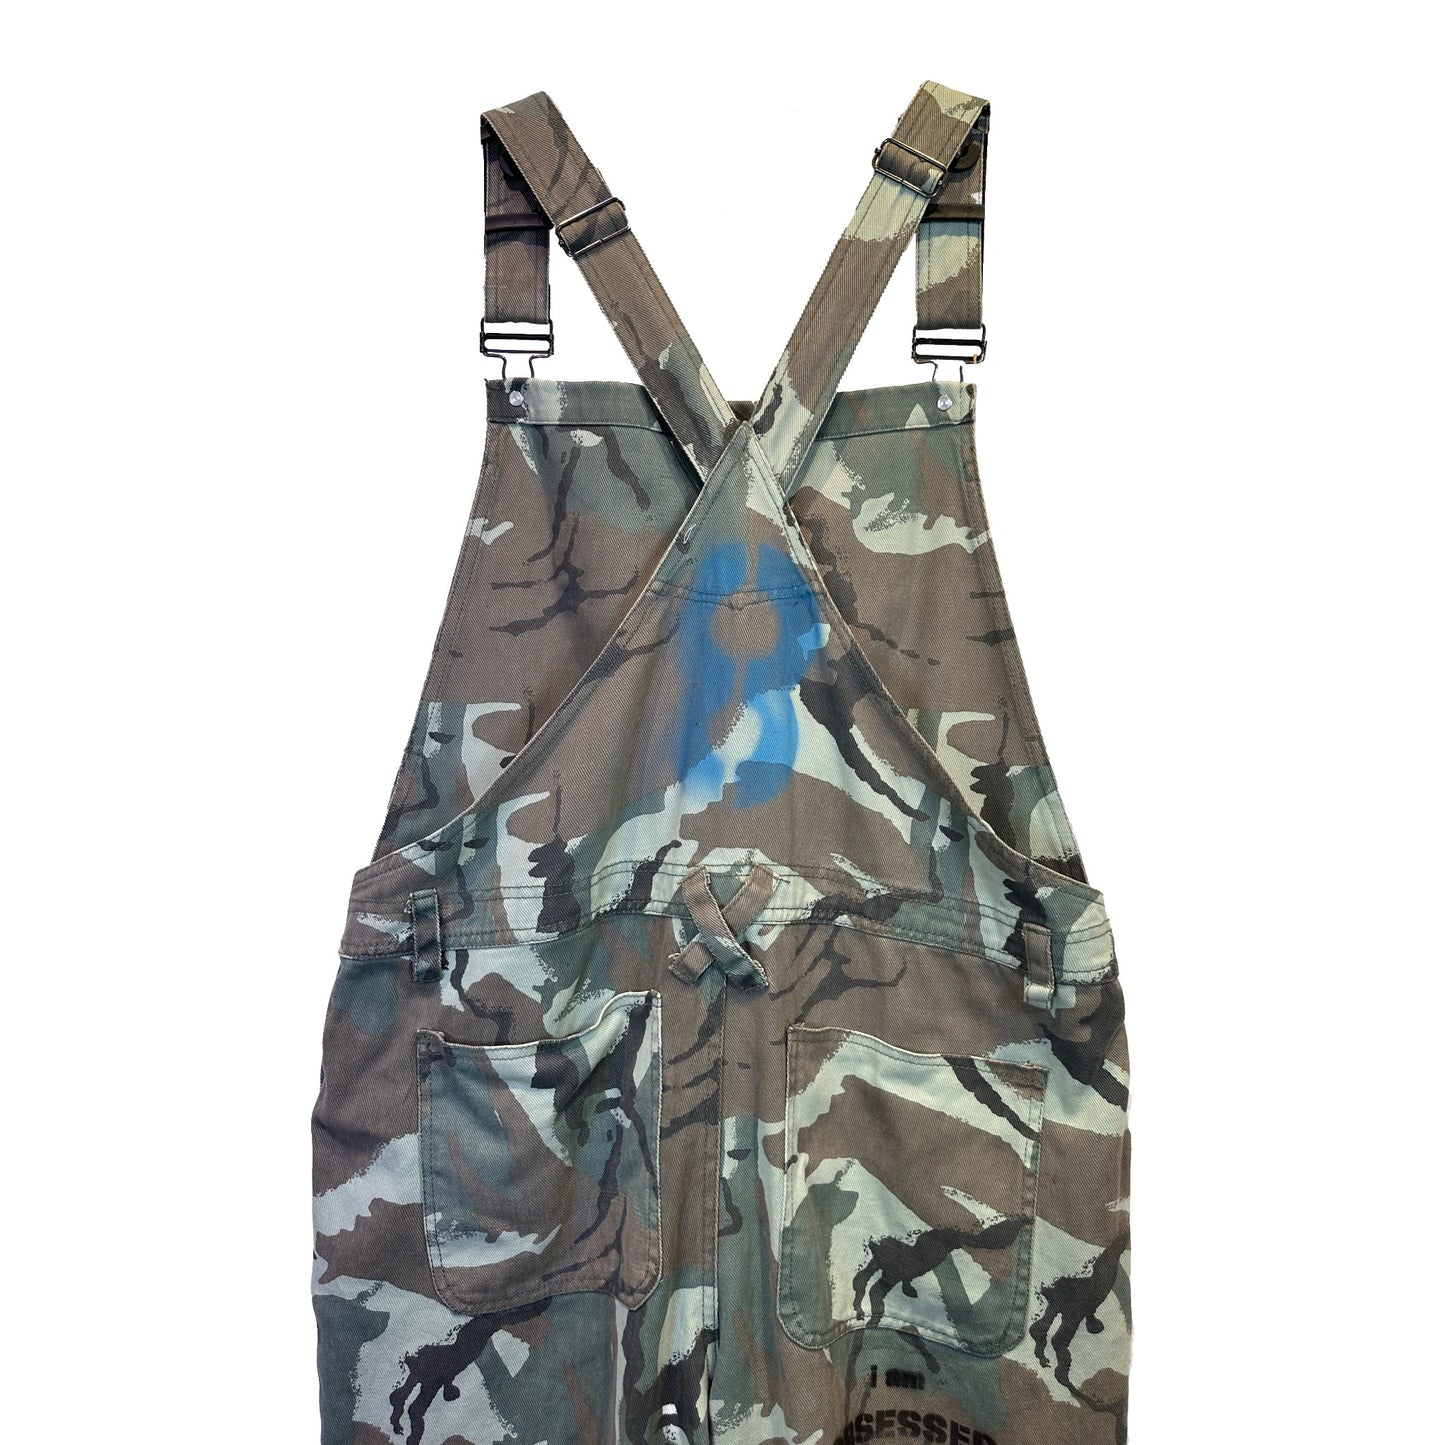 Doodled Camouflage Overalls